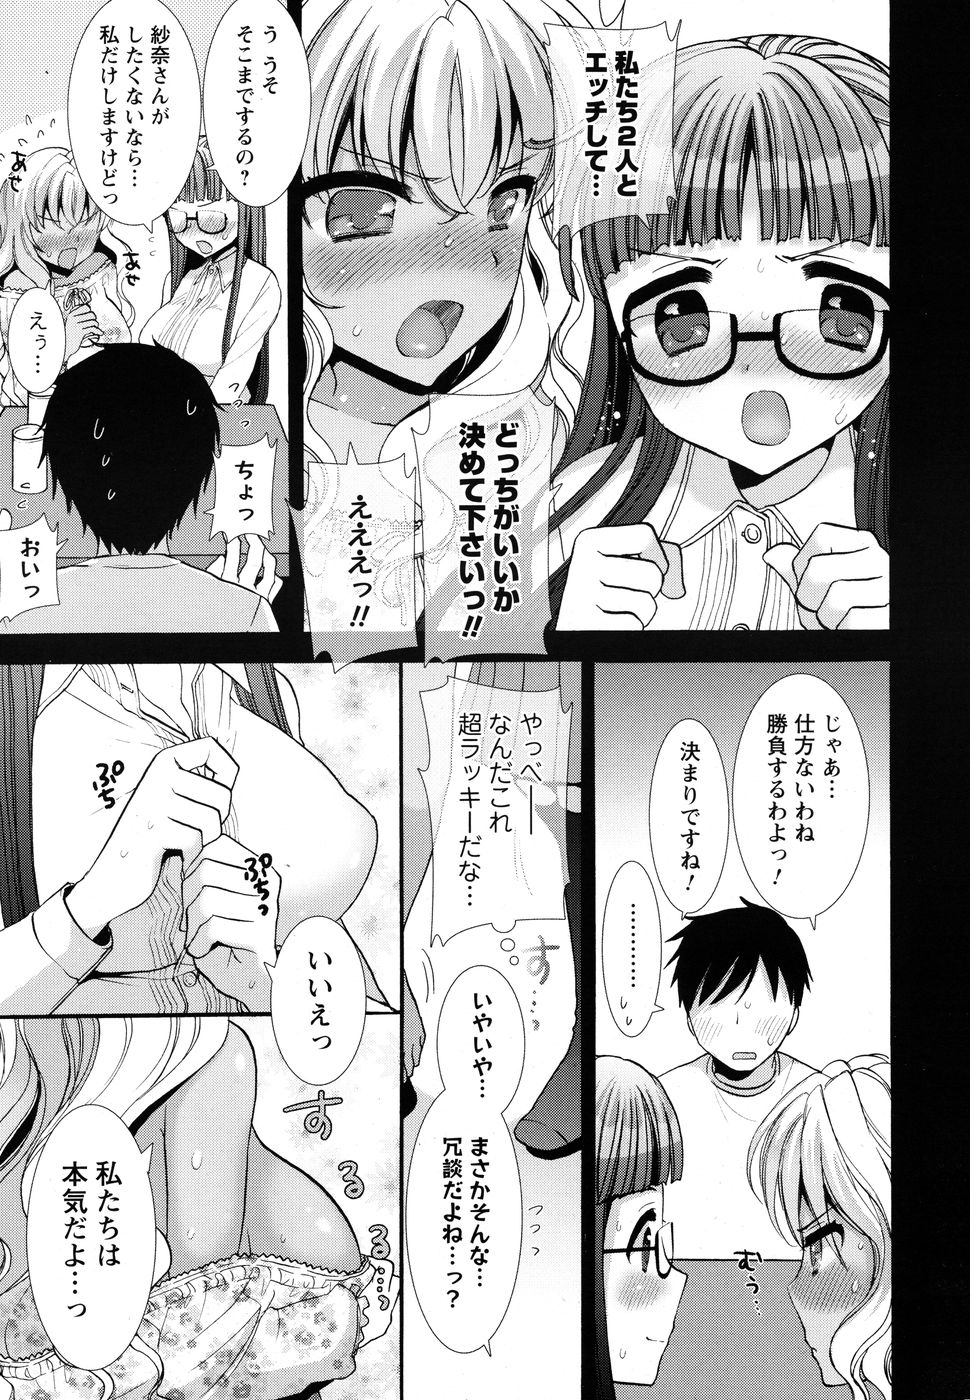 Men's Young Special Ikazuchi 2010-06 Vol. 14 page 12 full